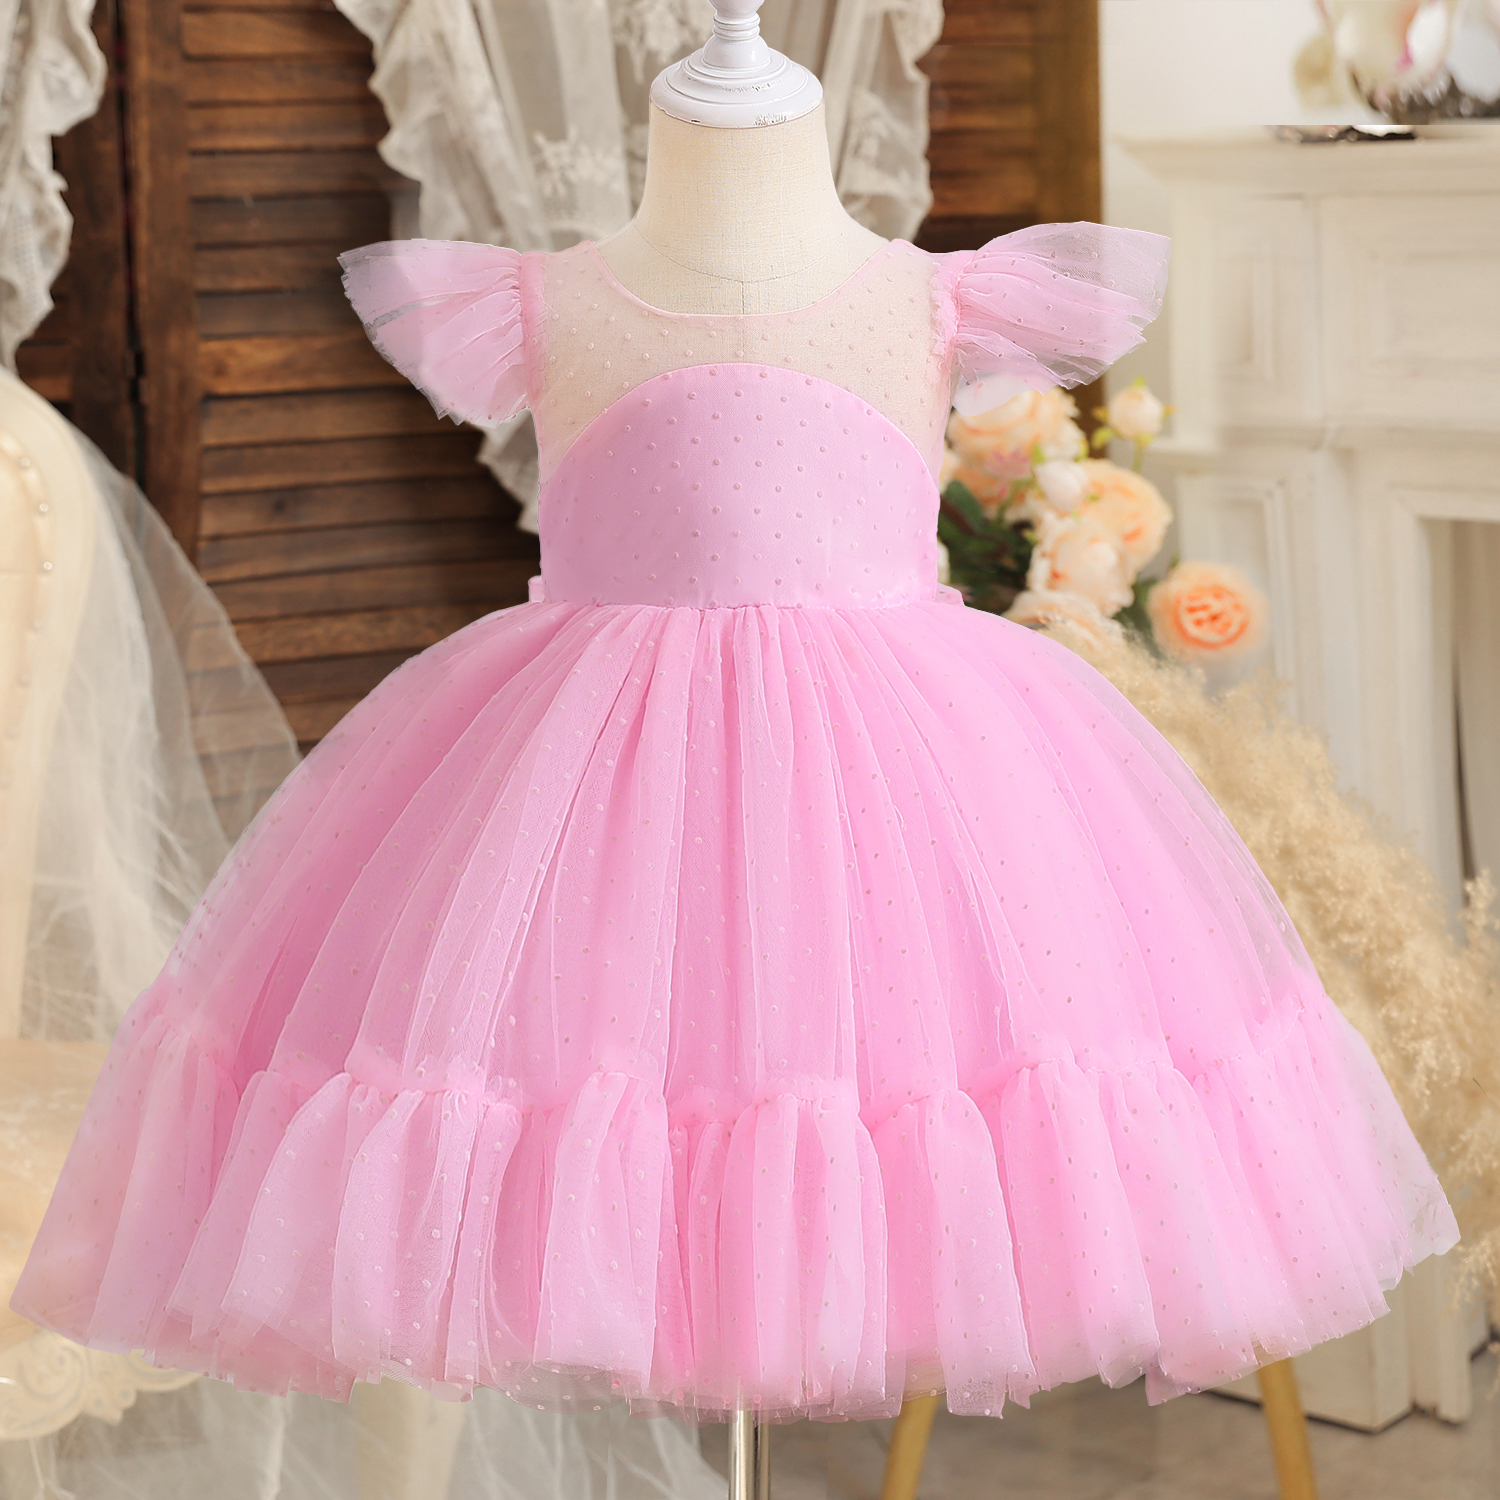 AAMILIFE Kids Dress for Girls Dresses for Party and Wedding Christmas  Clothing Princess Flower Tutu Dress Children Prom Ball Gown 